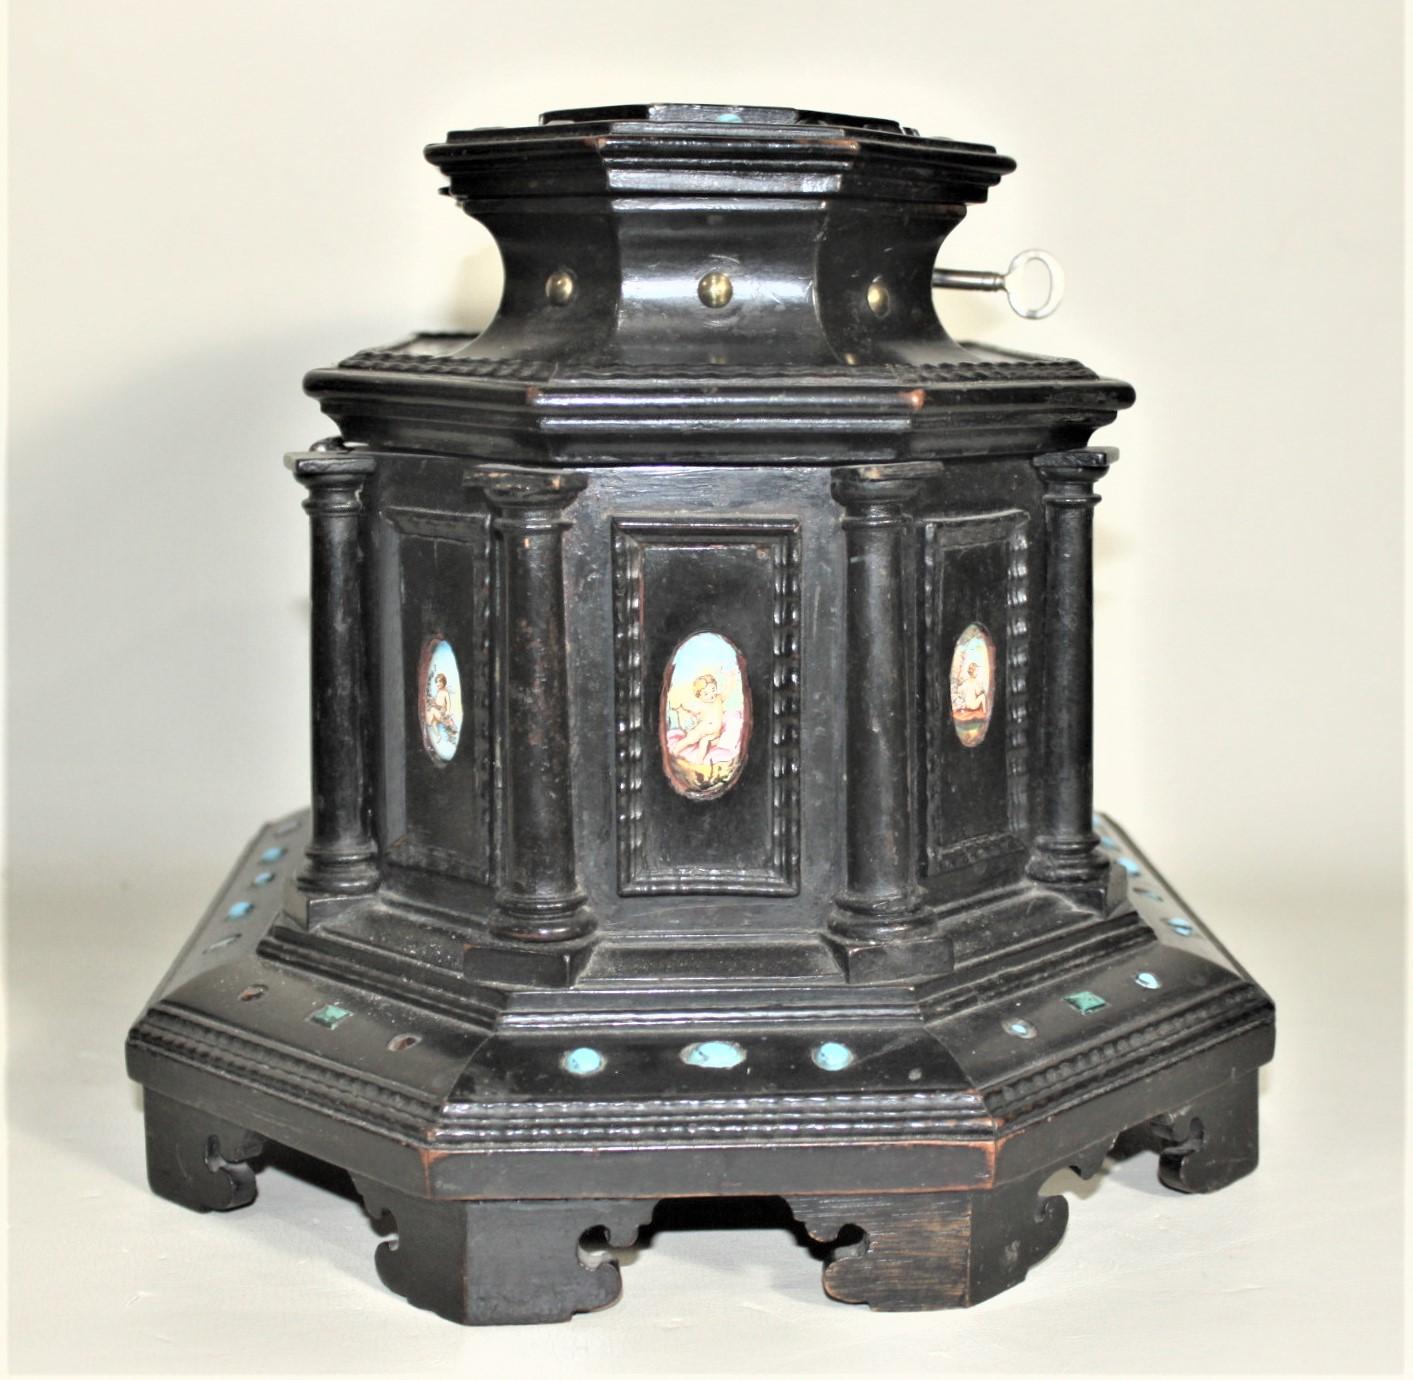 Hand-Crafted Antique Two Tiered Jewelry Casket or Box with Inaid Stones & Porcelain Panels For Sale